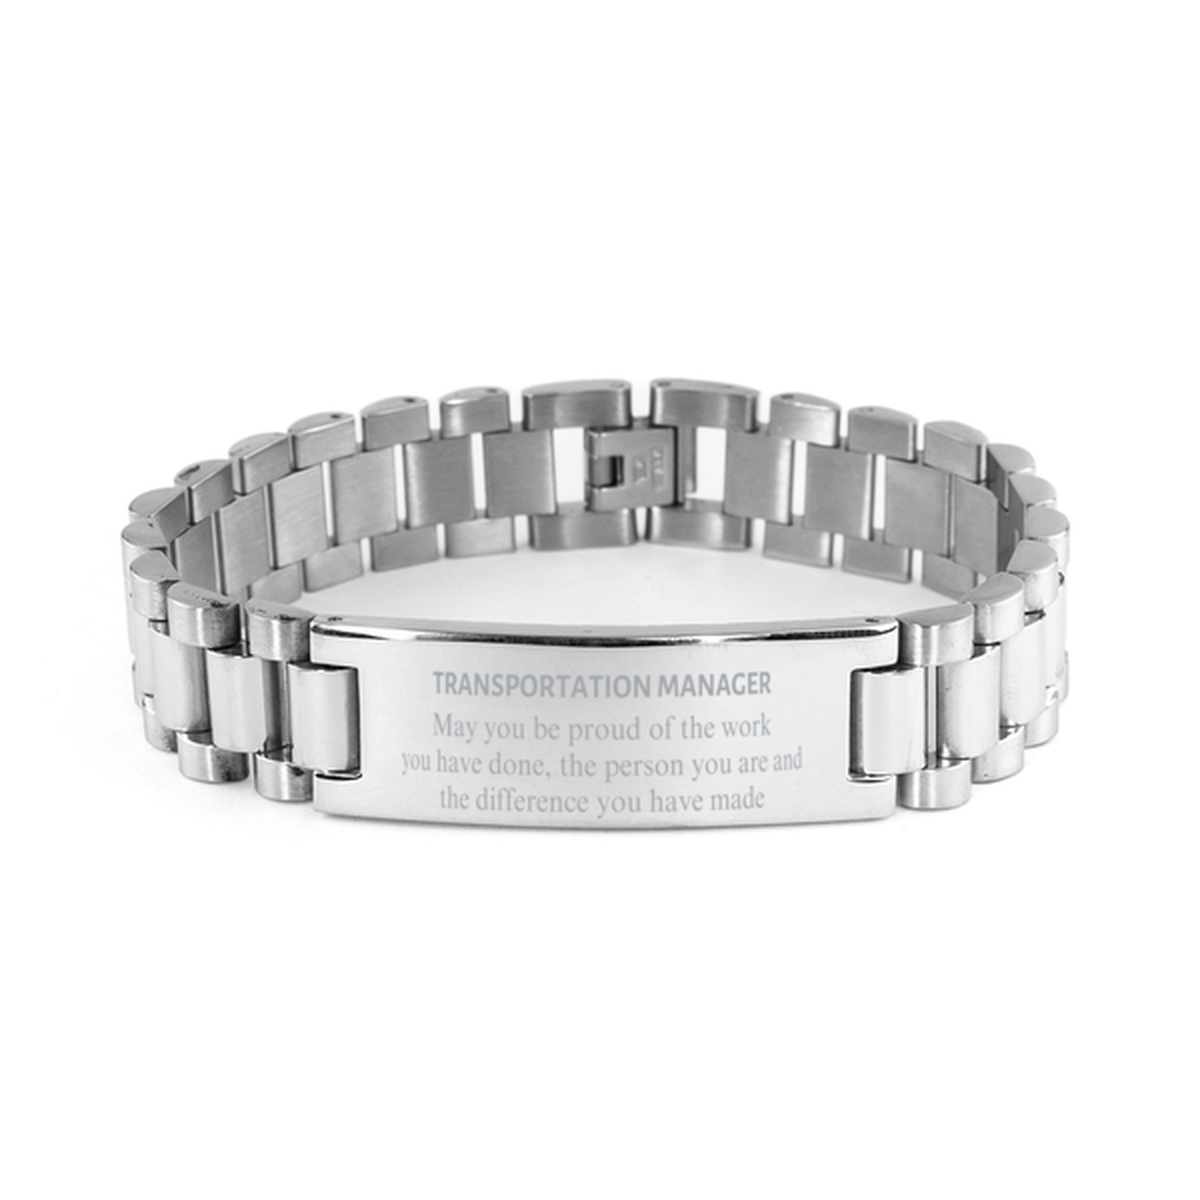 Transportation Manager May you be proud of the work you have done, Retirement Transportation Manager Ladder Stainless Steel Bracelet for Colleague Appreciation Gifts Amazing for Transportation Manager